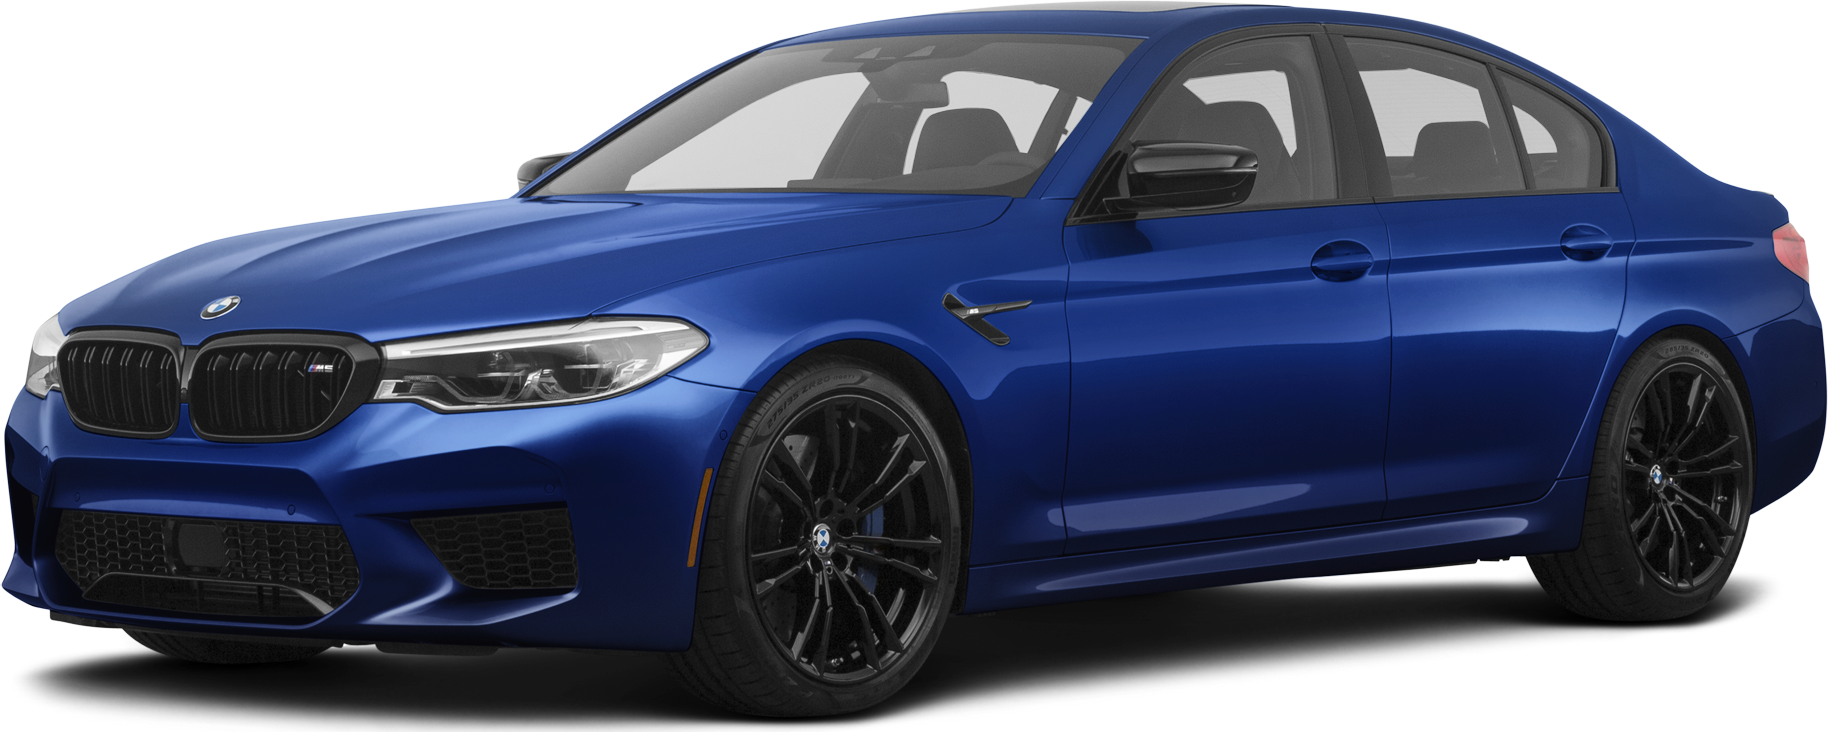 2020 BMW M5 Values & Cars for Sale | Kelley Blue Book